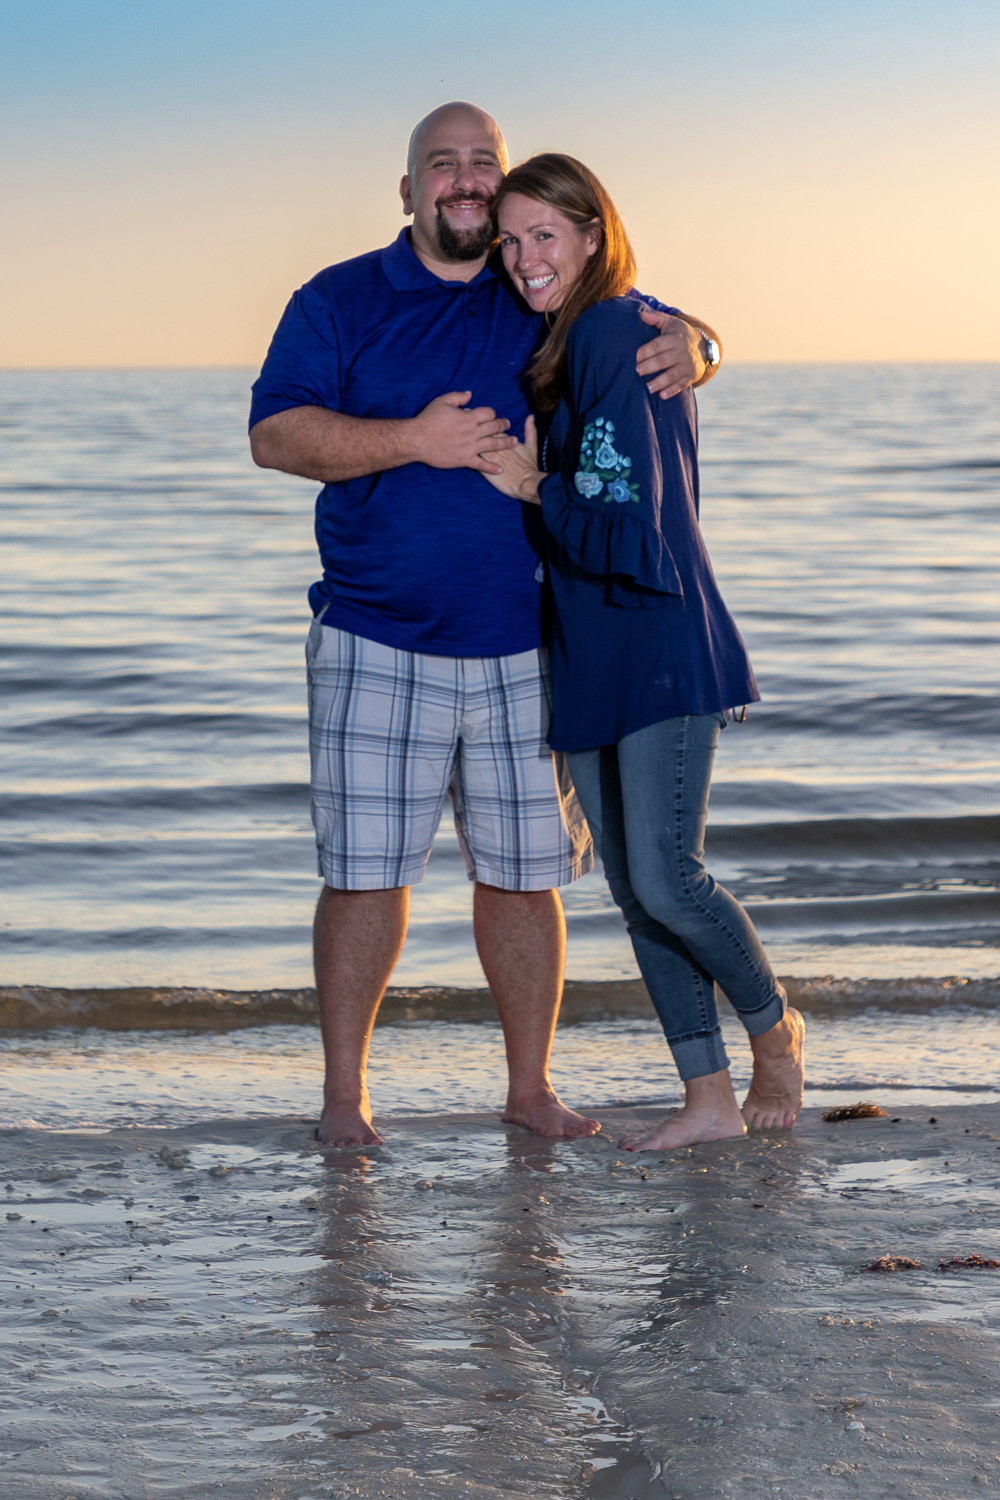   Steve McCarthy Photography: Premier SWFL Wedding, Portrait and Event Photographer serving all of SWFL , from Tampa to Naples, Fort Myers Beach, Pine Island, Sanibel, Captiva and Marco Island and over to Miami and up to Delray Beach, including: Tamp